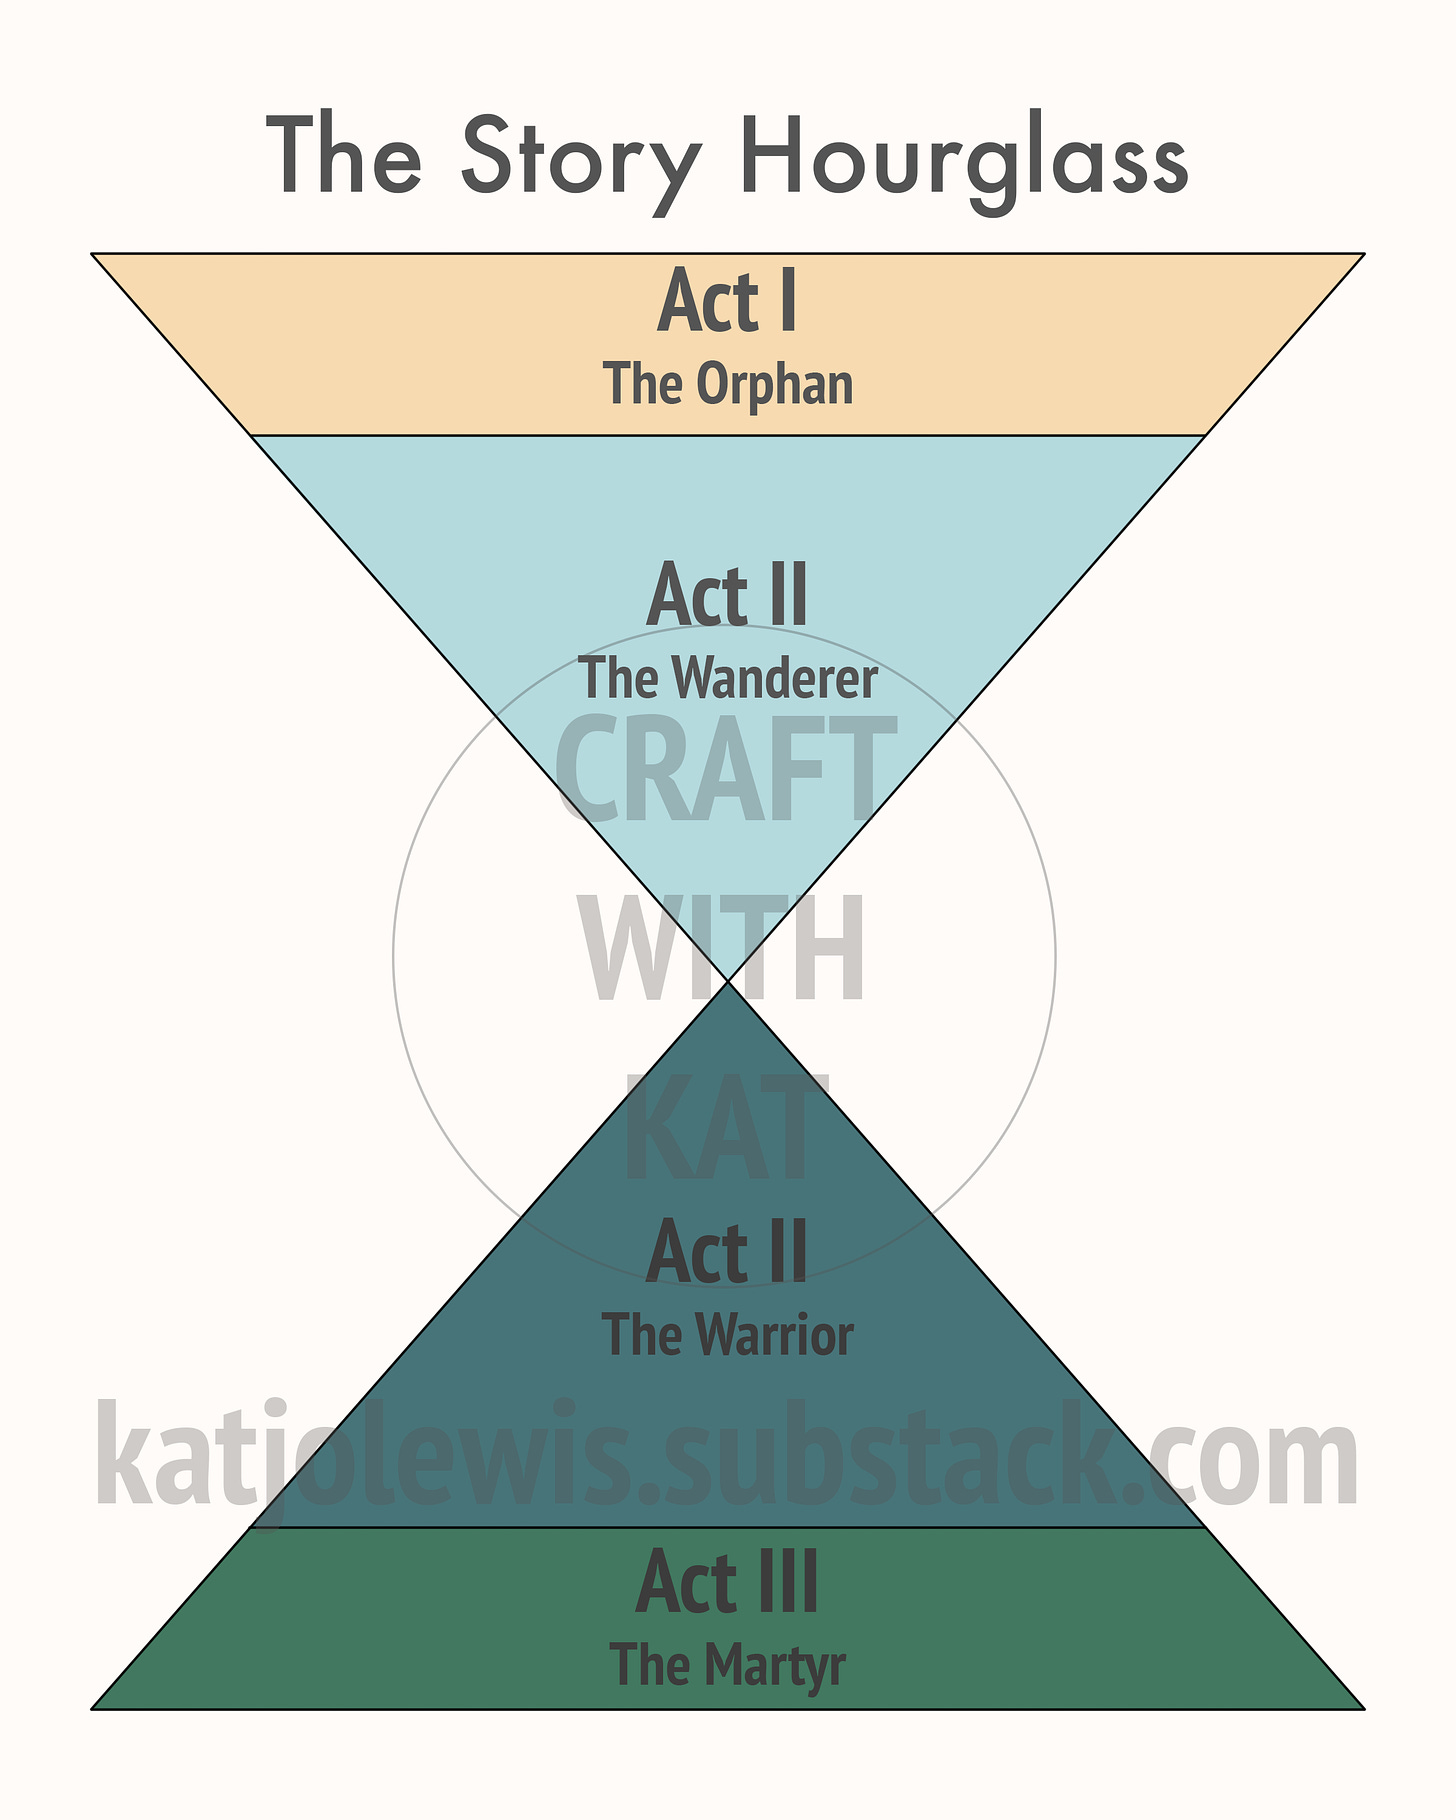 An infographic titled The Story Hourglass. The image is an hourglass divided into four sections. The sections are labeled as follows: Act I The Orphan, Act IIA The Wanderer, Act IIB The Warrior, Act III The Martyr. 